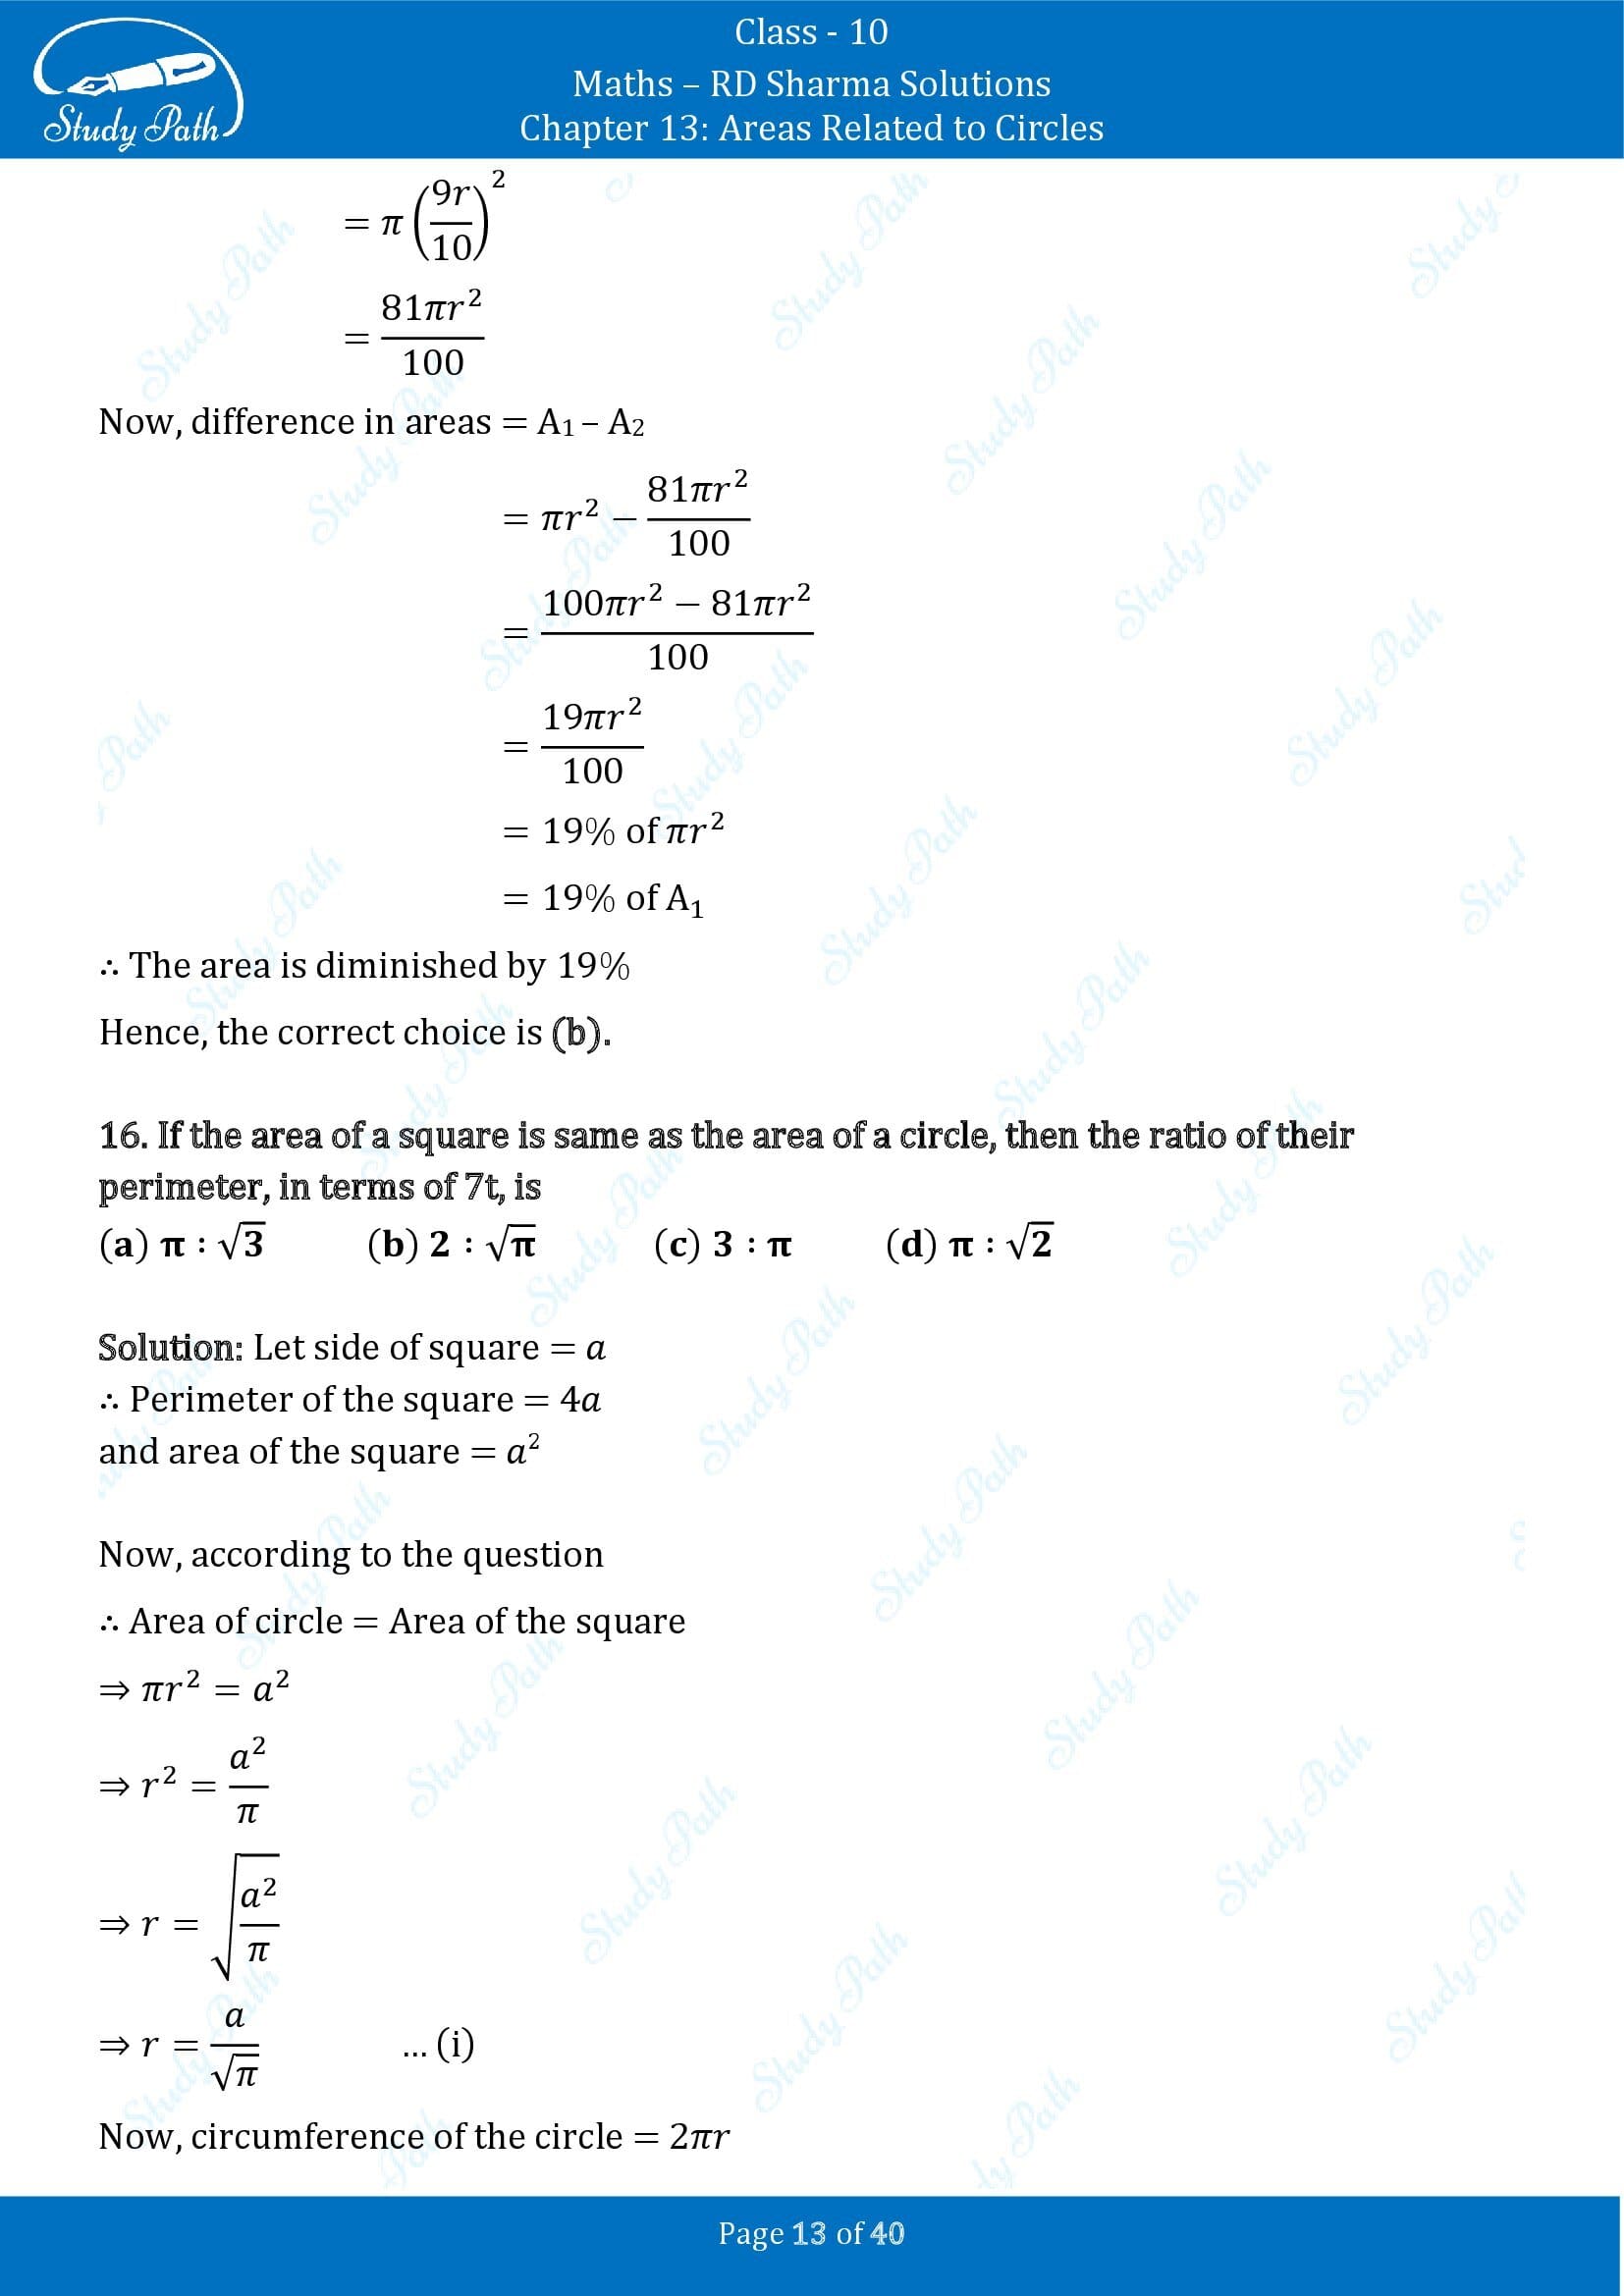 RD Sharma Solutions Class 10 Chapter 13 Areas Related to Circles Multiple Choice Question MCQs 00013